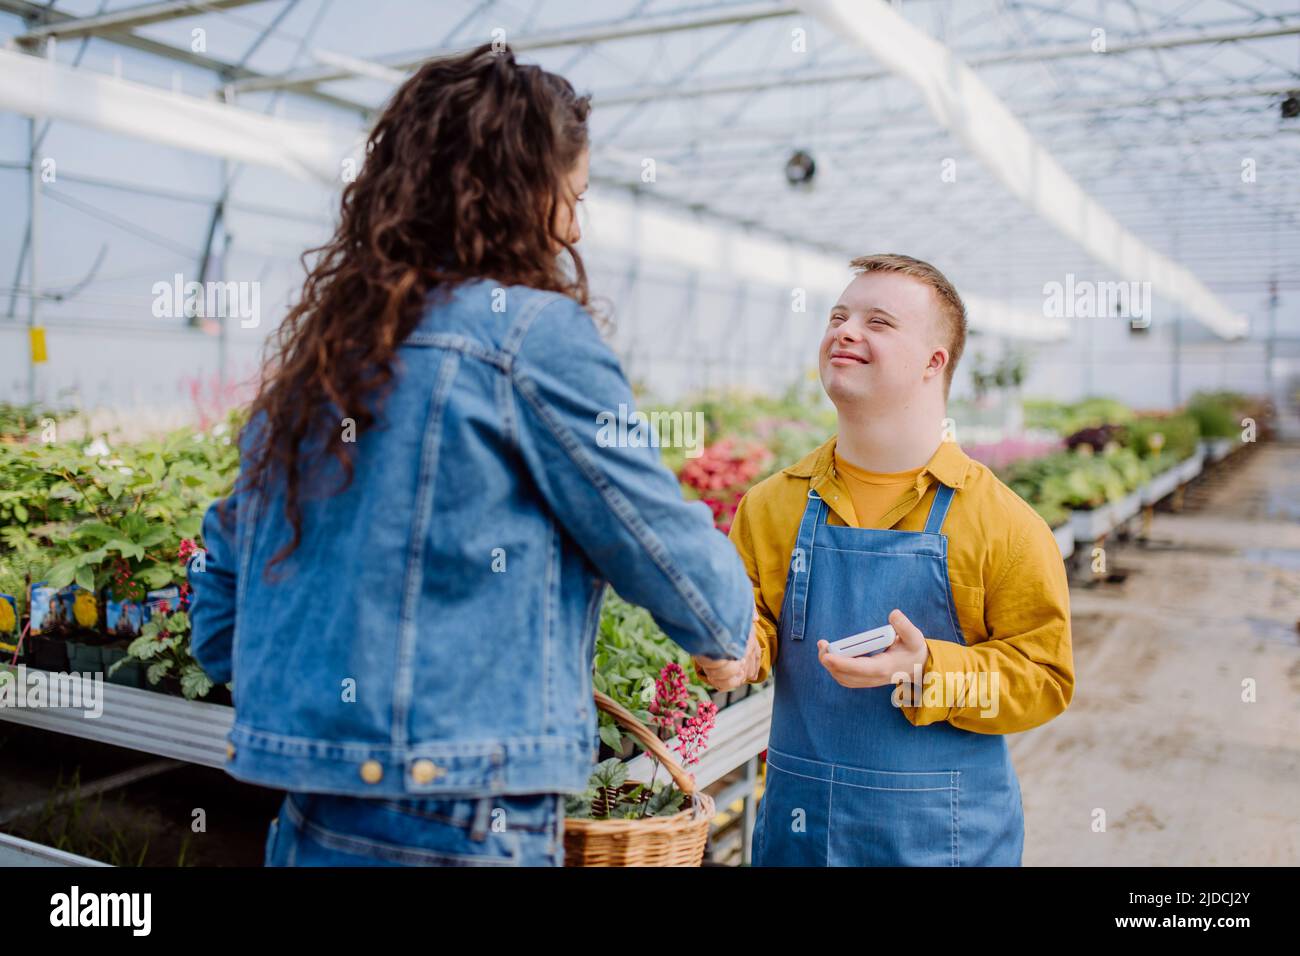 Happy young employee with Down syndrome working in garden centre, taking payment from customer. Stock Photo